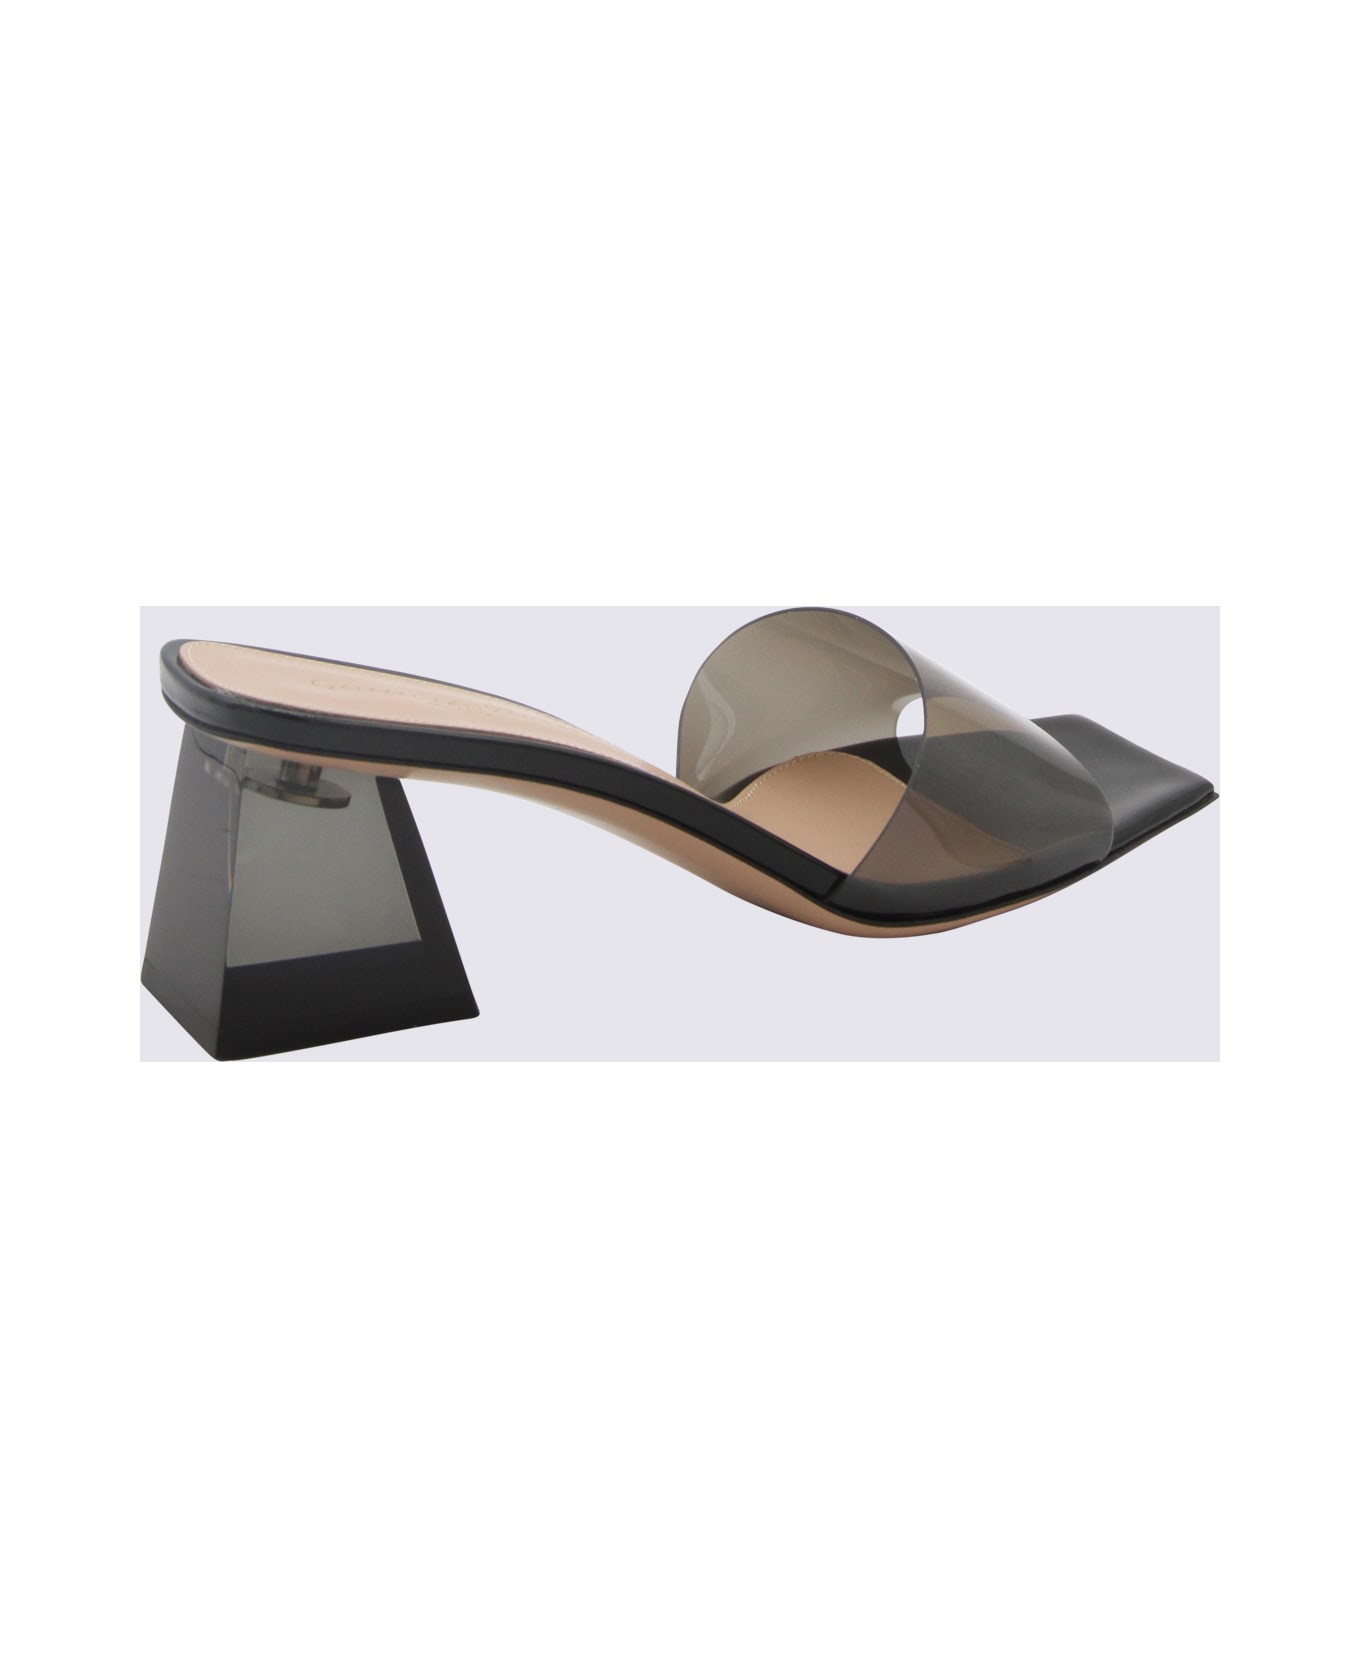 Gianvito Rossi Fume And Black Pvc And Leather Cosmic Sandals - FUME/BLACK